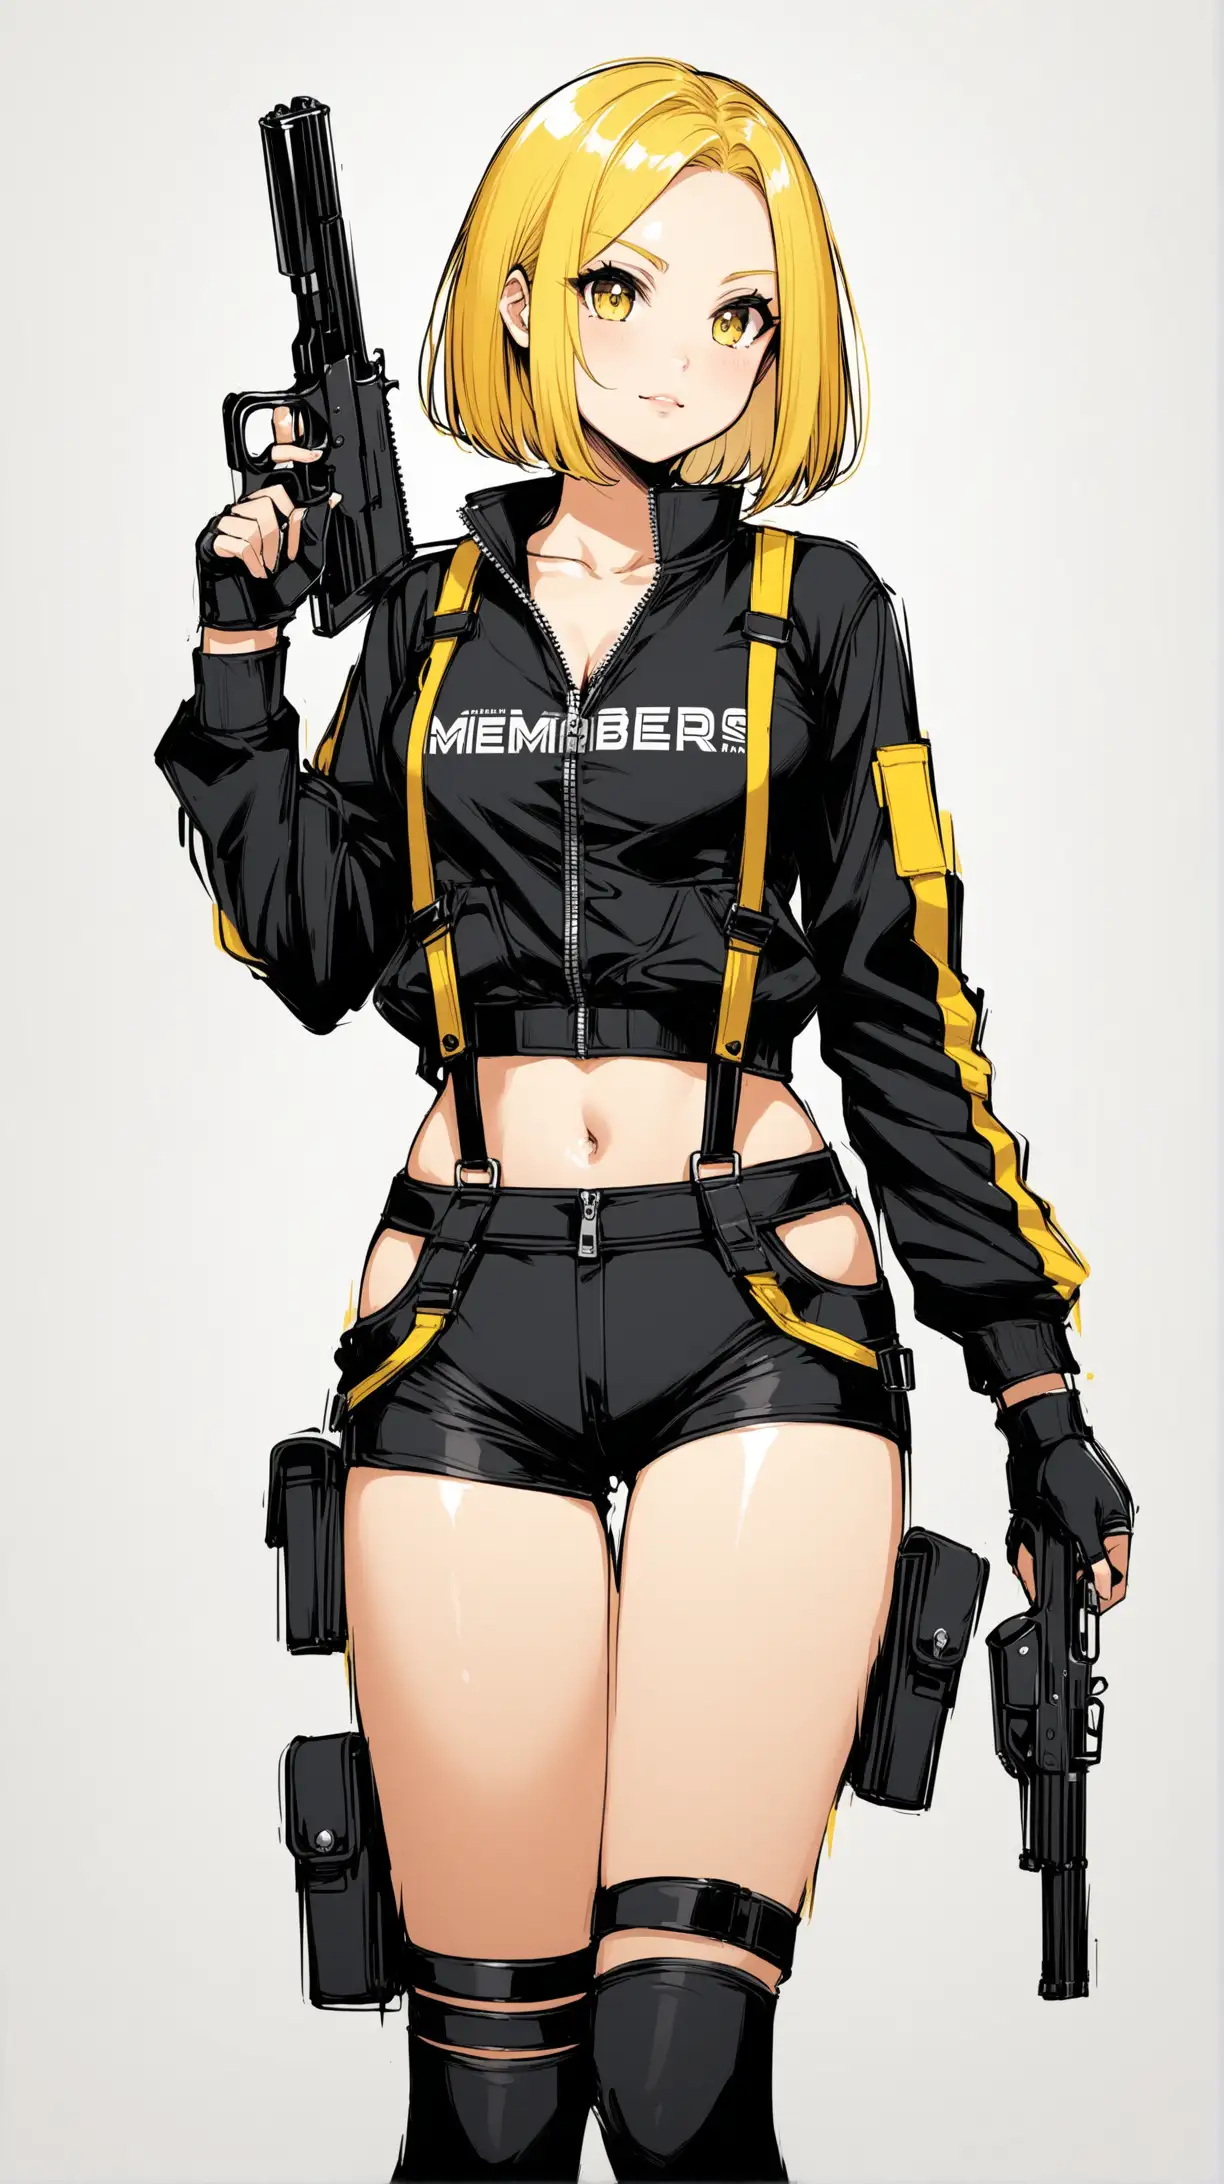 sexy fit 24 year old hero girl, short chin length yellow hair, wearing black members only jacket zipped up, suspenders, black shorts, guns in holsters on each thigh, yellow black white 3 color minimal design, white background